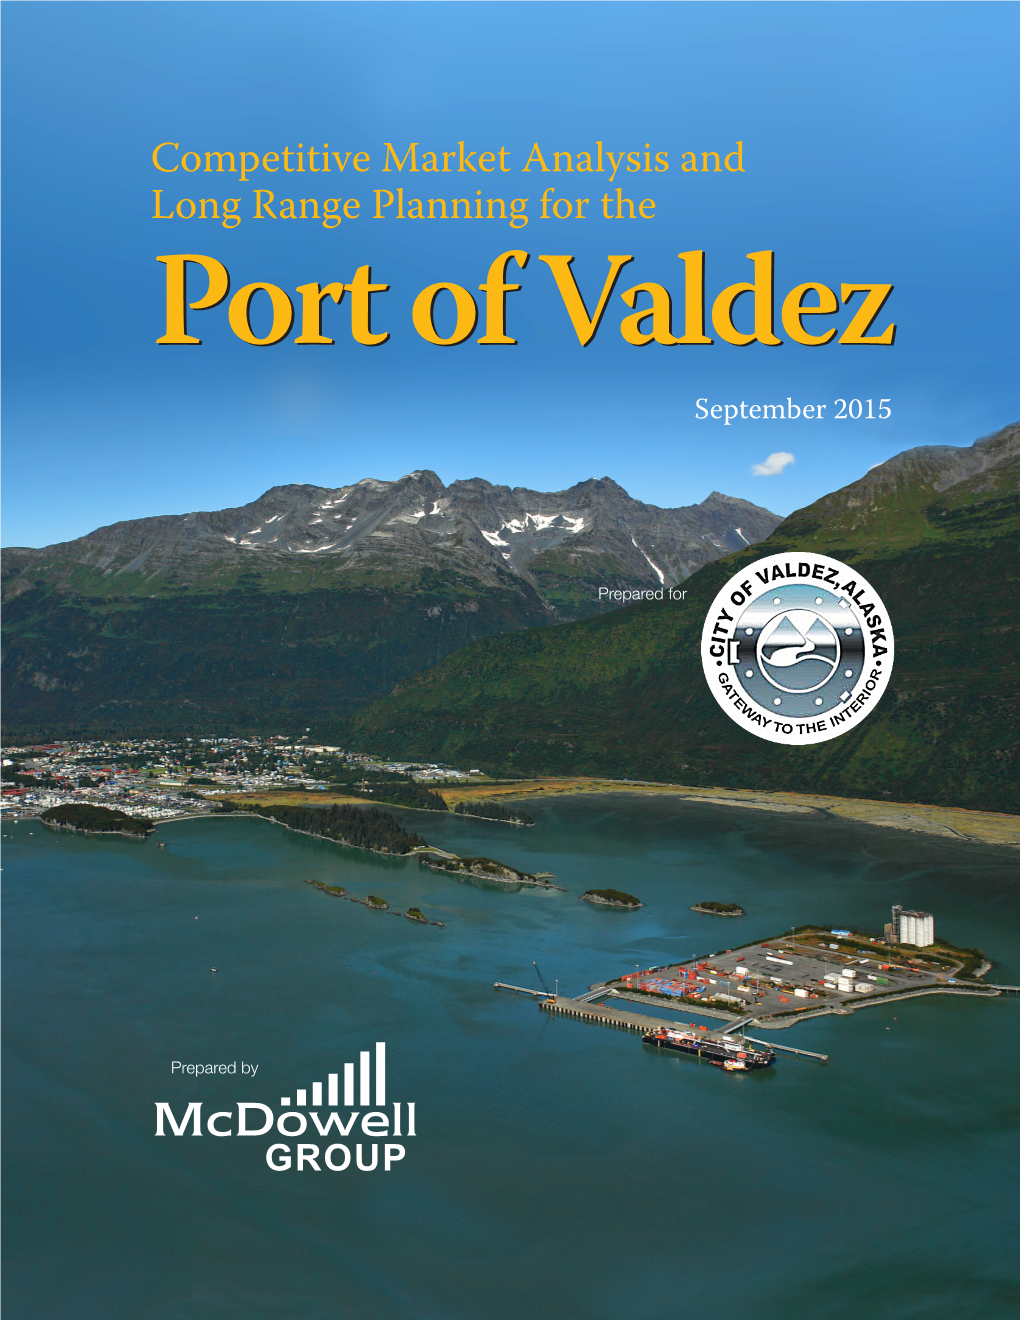 Competitive Market Analysis and Long Range Planning for the Port of Valdez